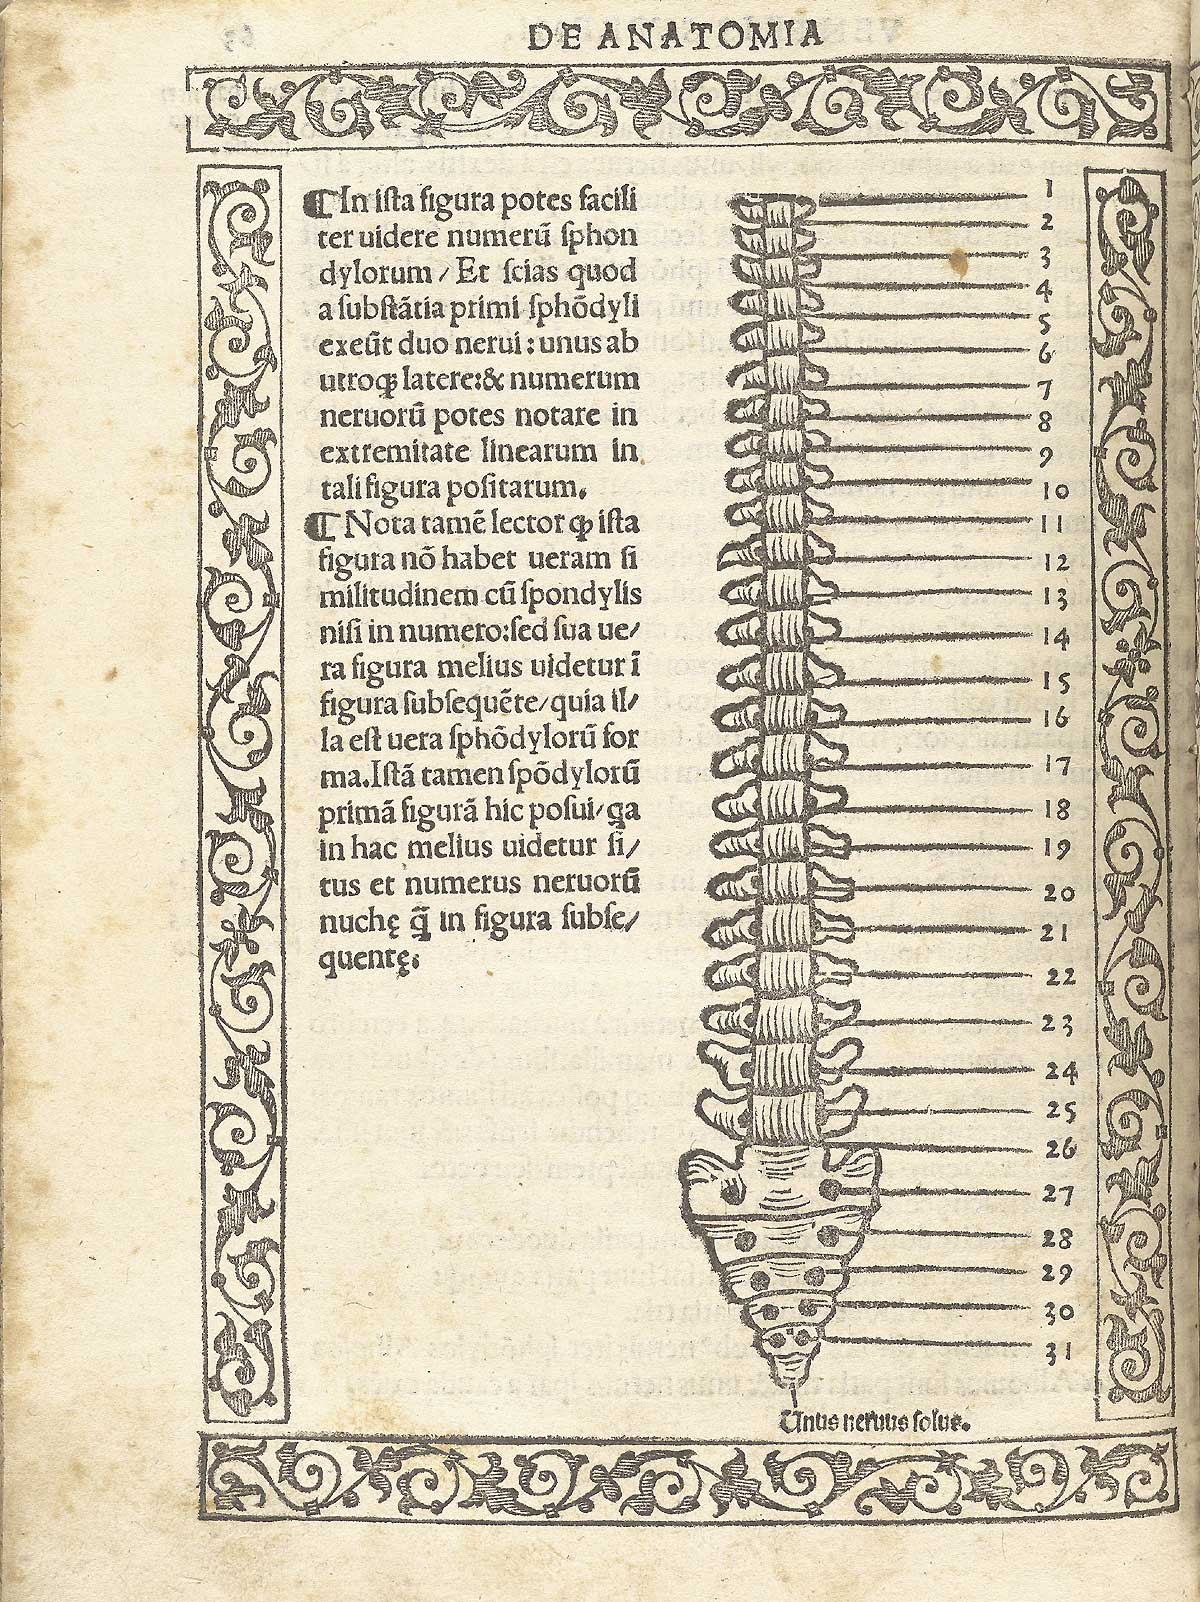 A woodcut figure of all the vertebrae of the spinal column viewed from the back, numbered, with a woodcut border and text in Latin on the left side of page, from Berengario da Carpi’s Isagogae breues, Bologna, 1523, NLM Call no. WZ 240 B488i 1523.